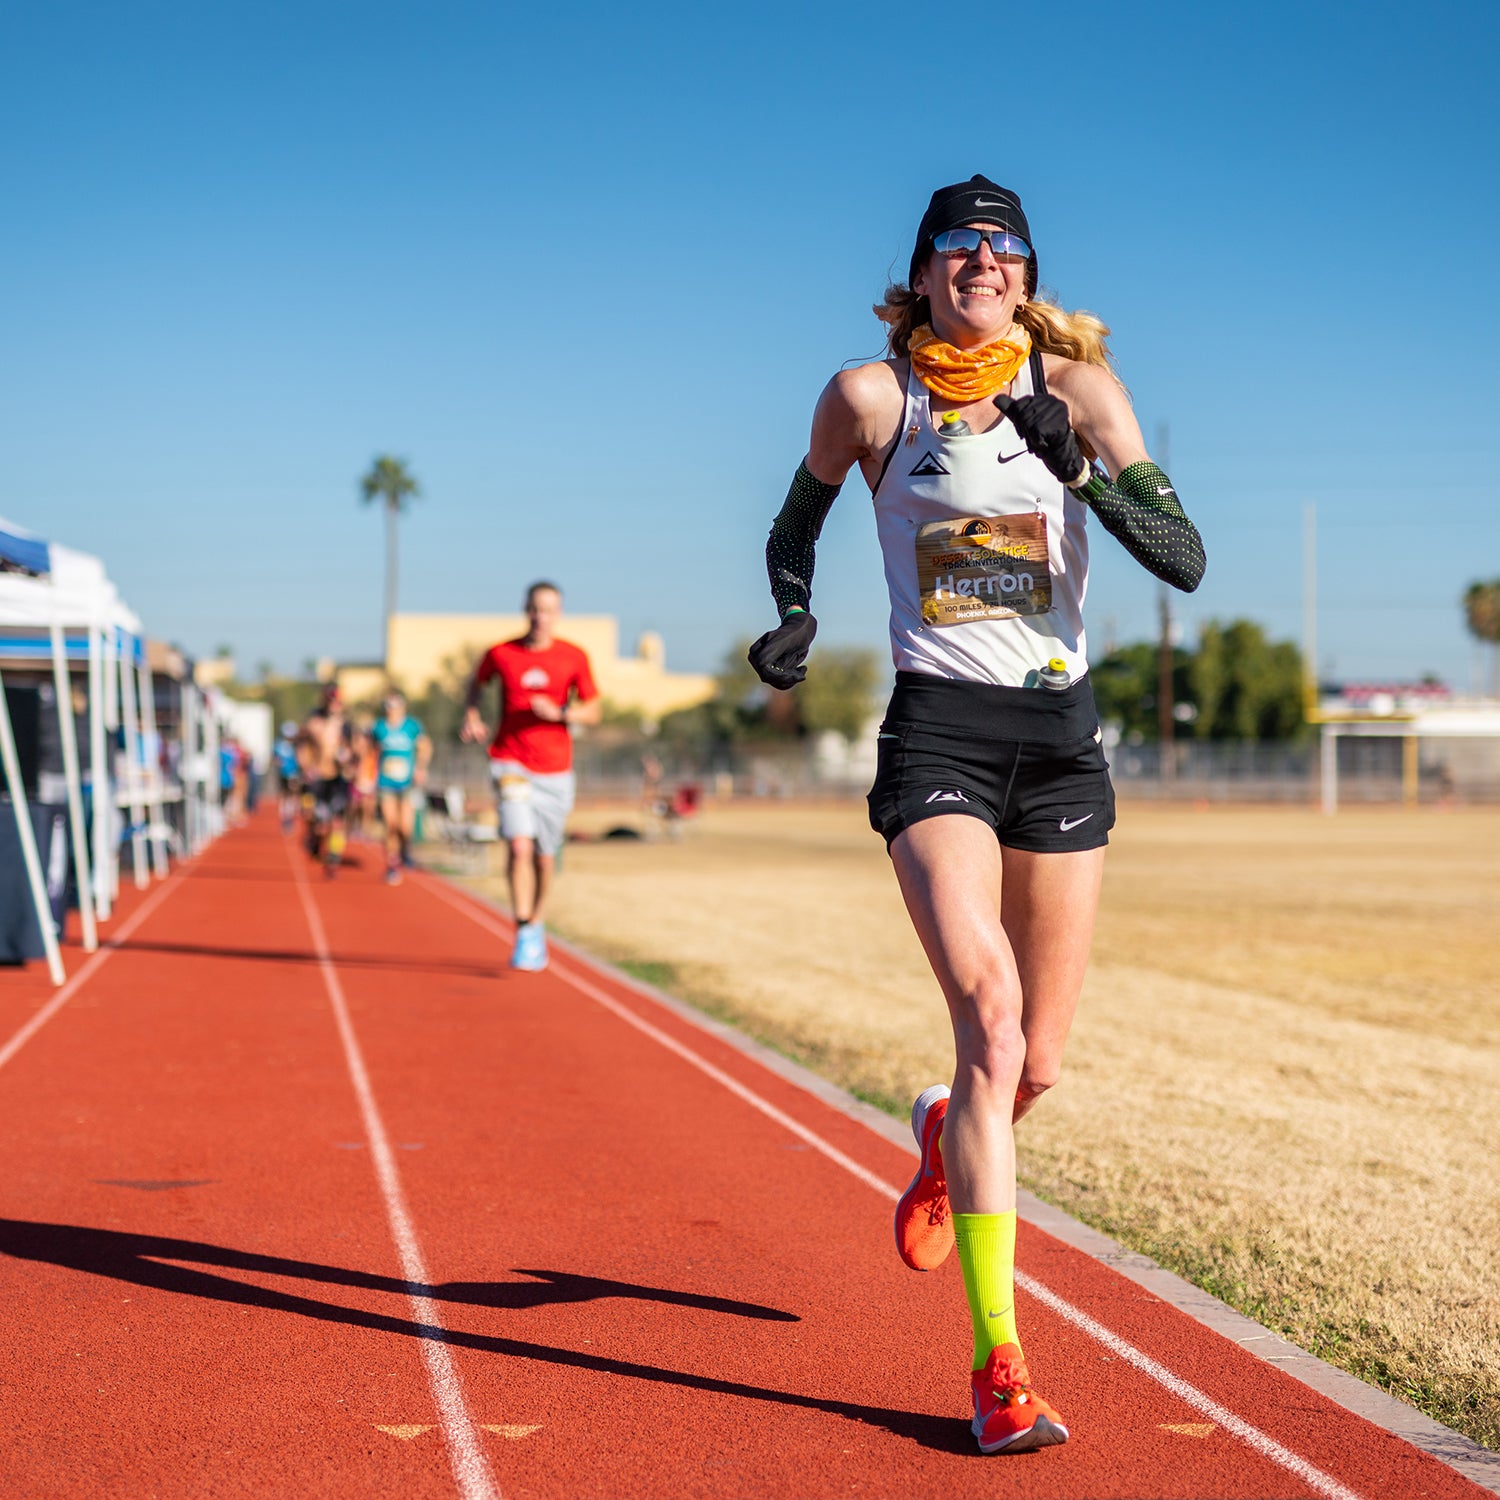 How Camille Herron Set a 24-Hour Running Record